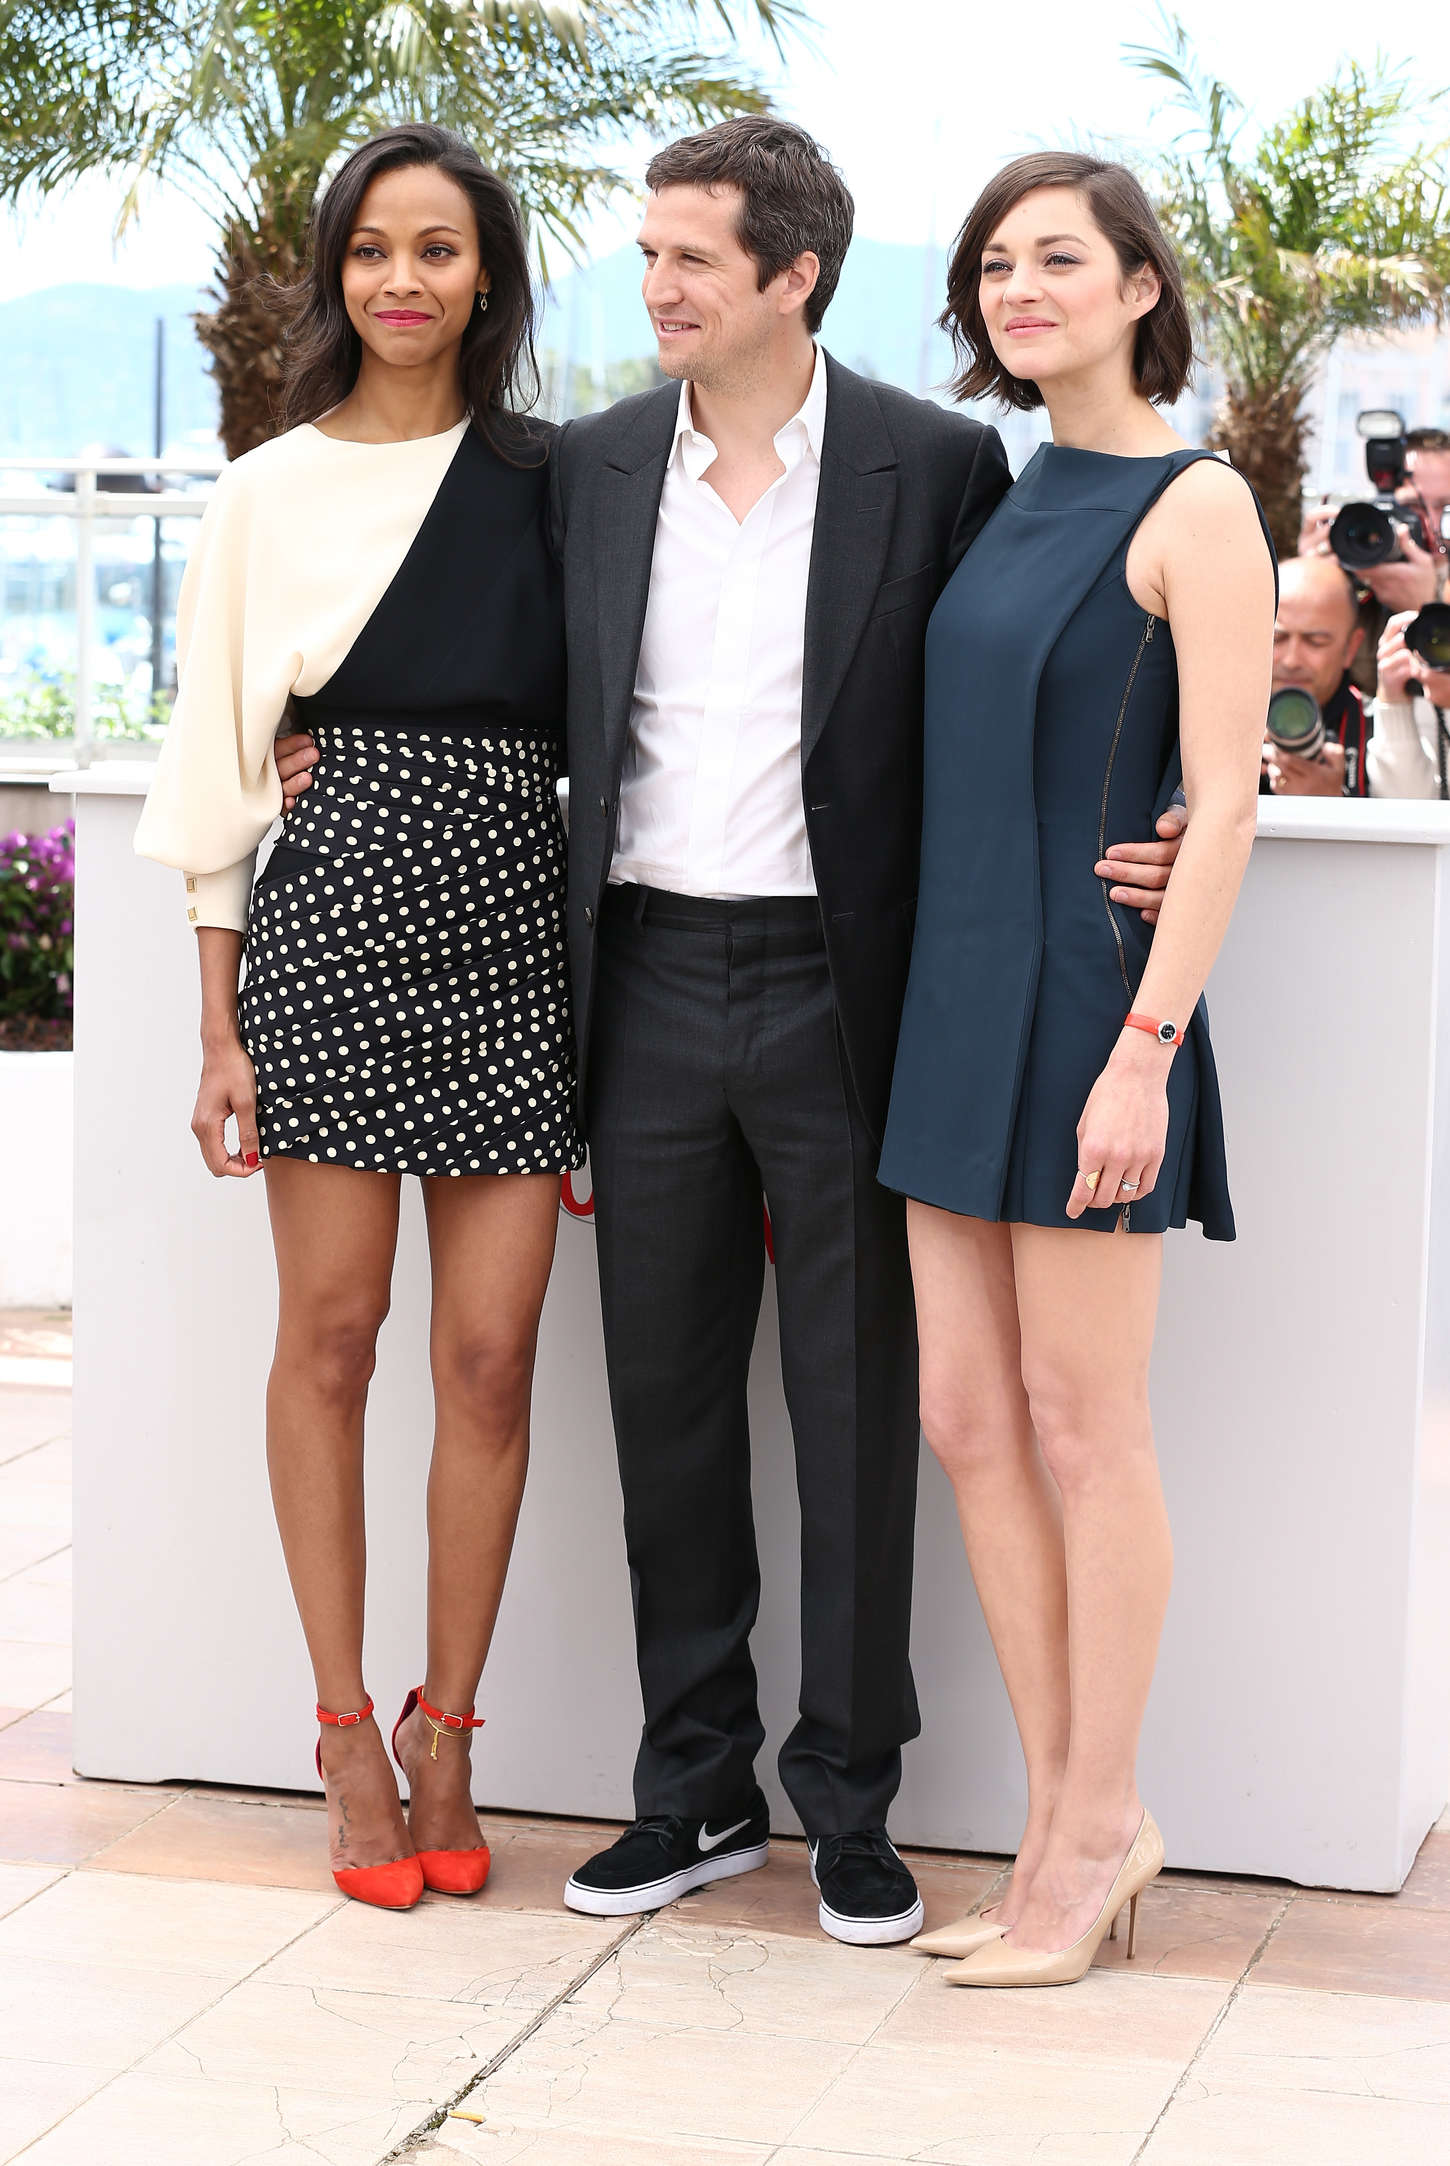 http://www.gotceleb.com/wp-content/uploads/celebrities/zoe-saldana/and-marion-cotillard-at-blood-ties-photocall-at-the-66th-cannes-film-festival/Zoe-Saldana-and-Marion-Cotillard-at-Blood-Ties-Photocall-at-the-66th-Cannes-Film-Festival-02.jpg